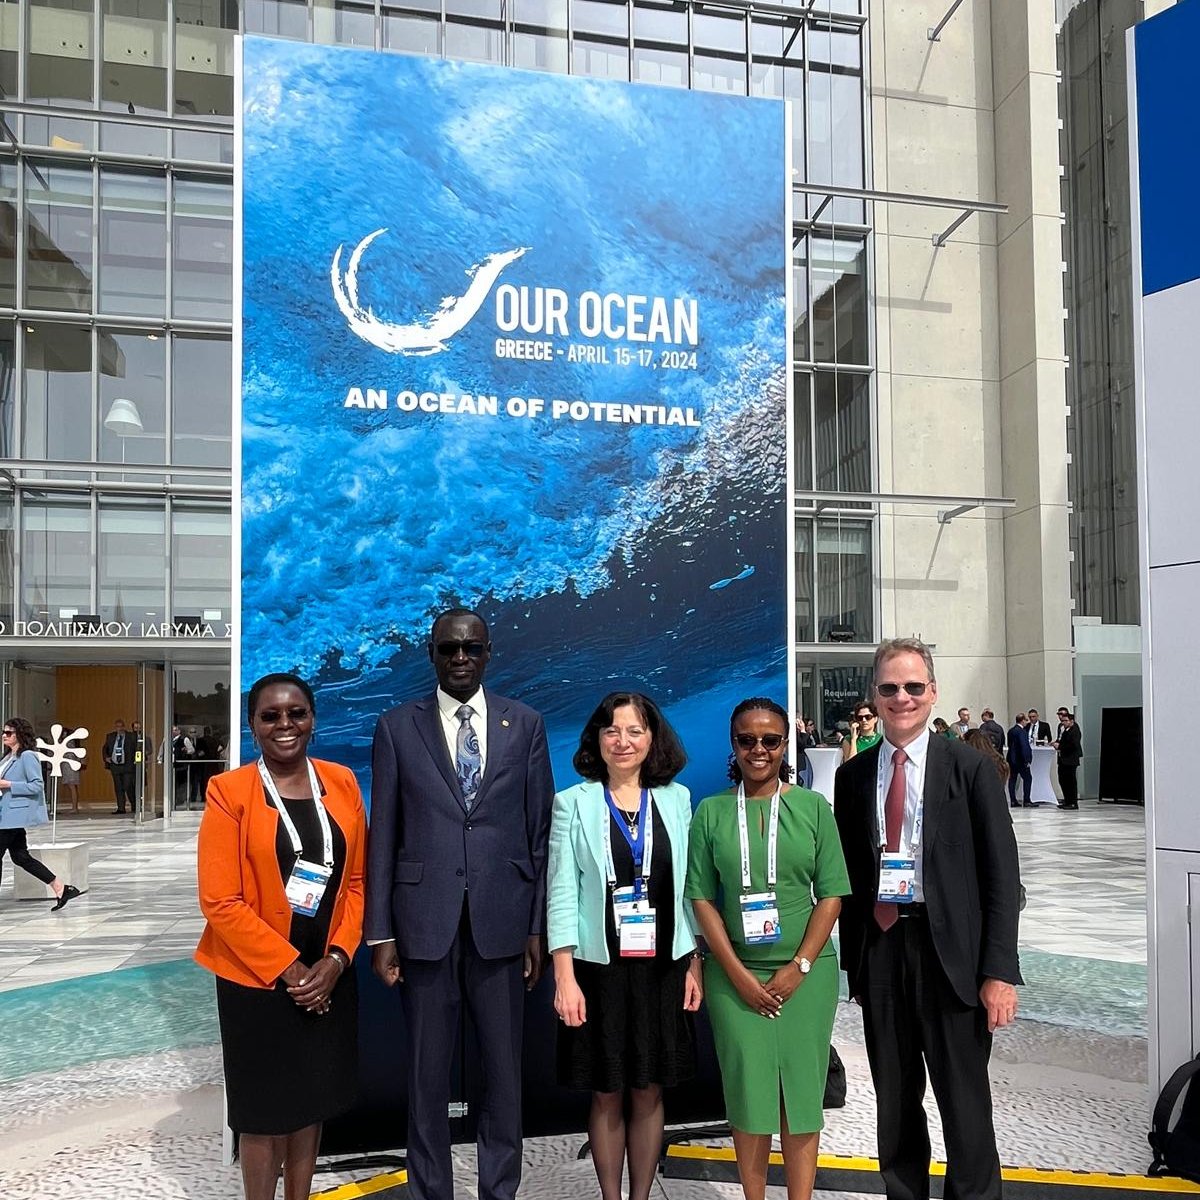 Starting off #OurOcean2024 by meeting with Kenya's Principal Secretary Betsy Muthoni Njagi & Deputy Chief of Staff of the President, Josphat Nanok. The perfect apportunity to discuss the upcoming 2nd edition of #BlueInvest Africa, taking place this July in Kenya! #OceanEU